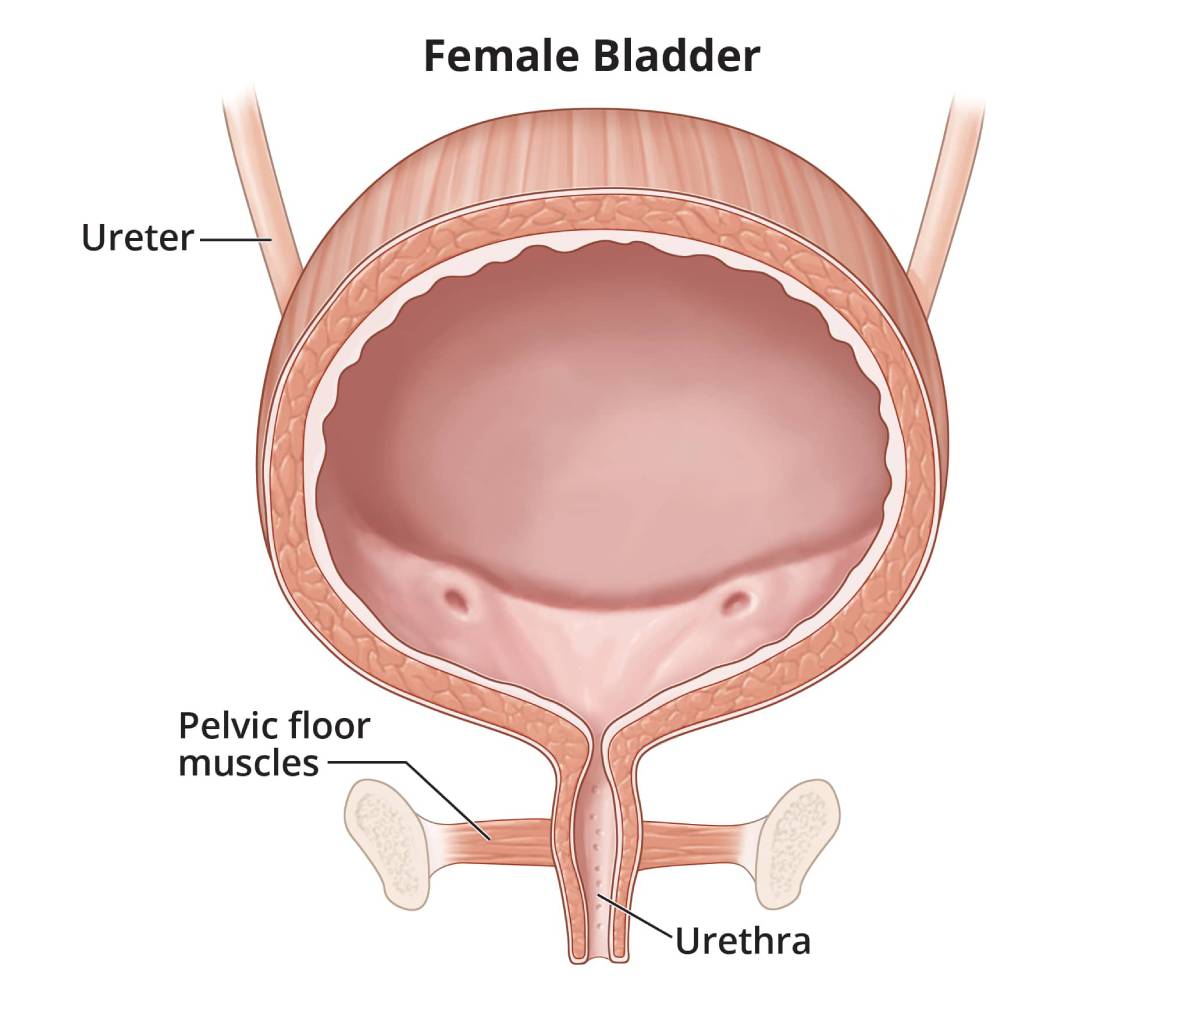 What Leads To Loss Of Bladder Control In Females?